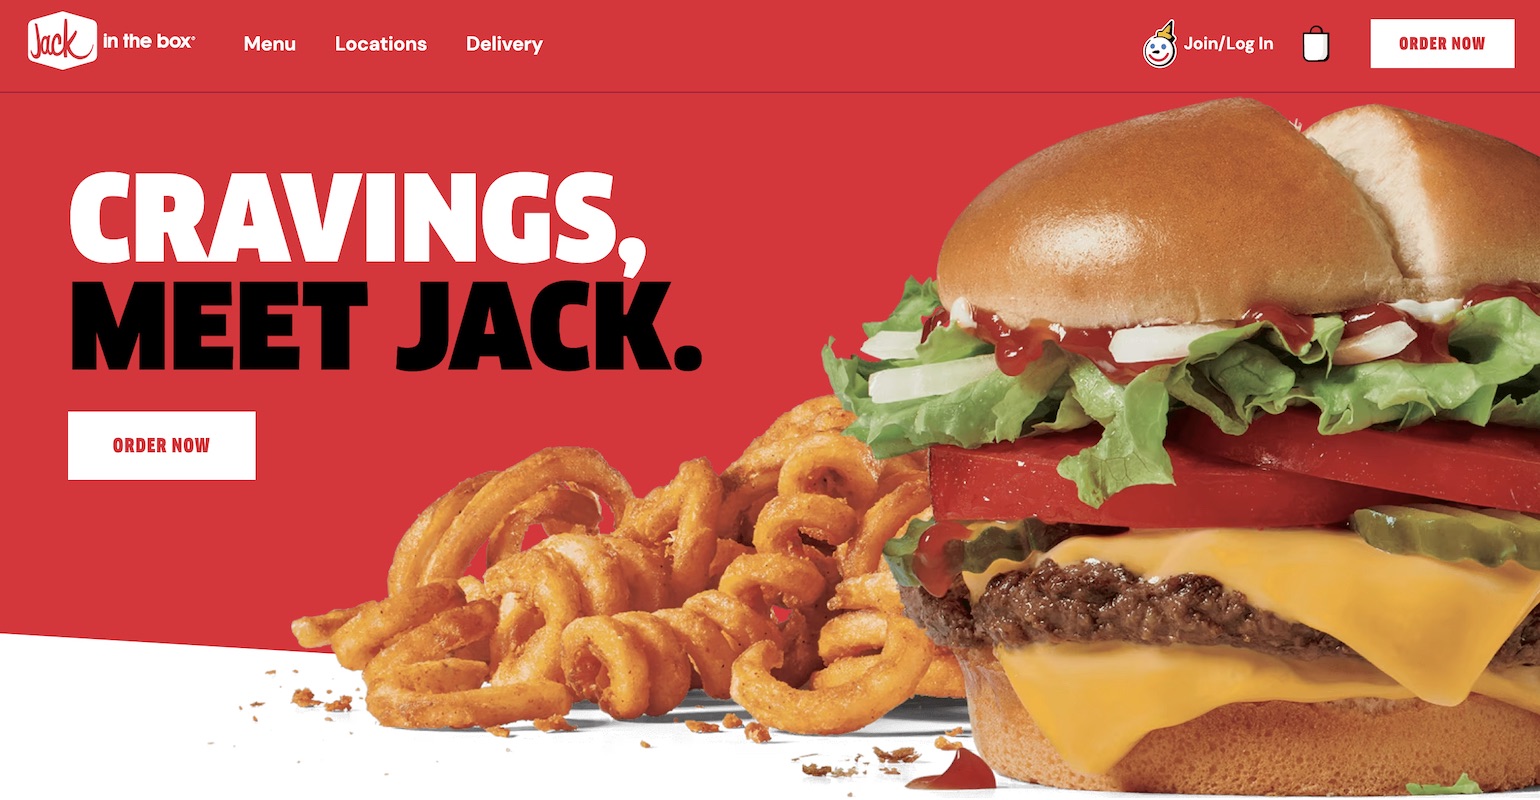 Jack in the Box overhauls ordering with new website and app